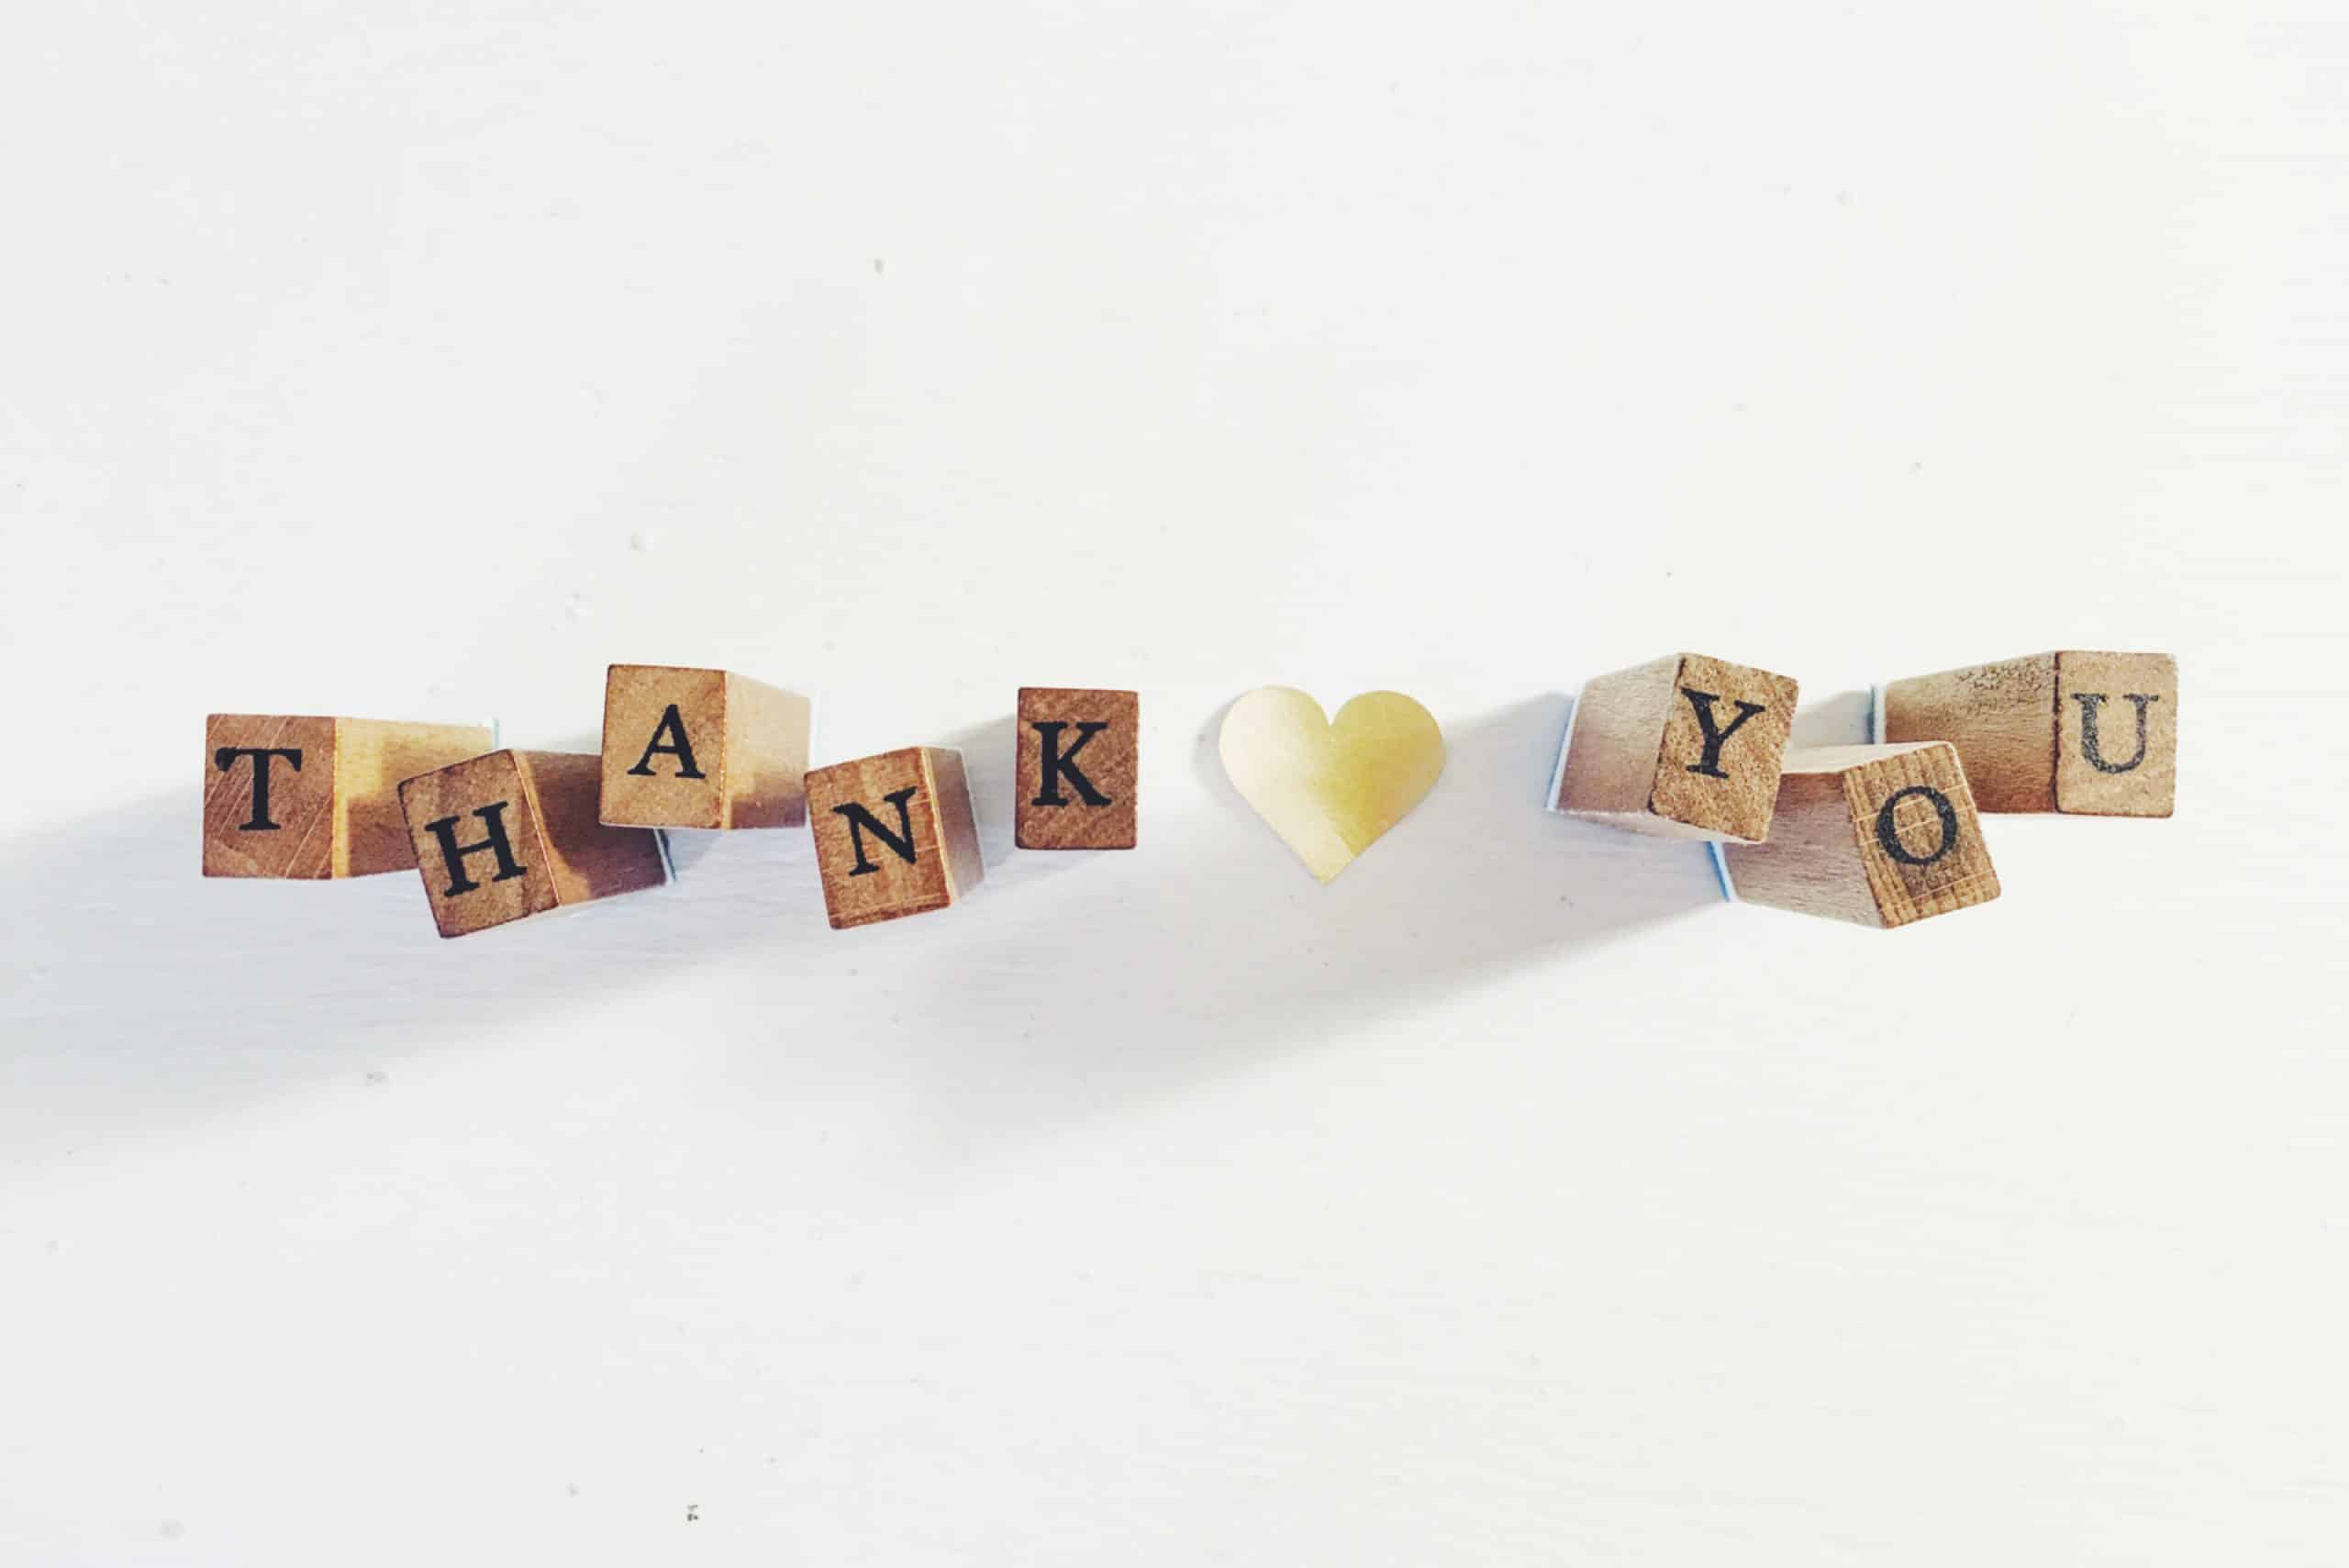 "Thank you" spelled out in wooden blocks with a heart